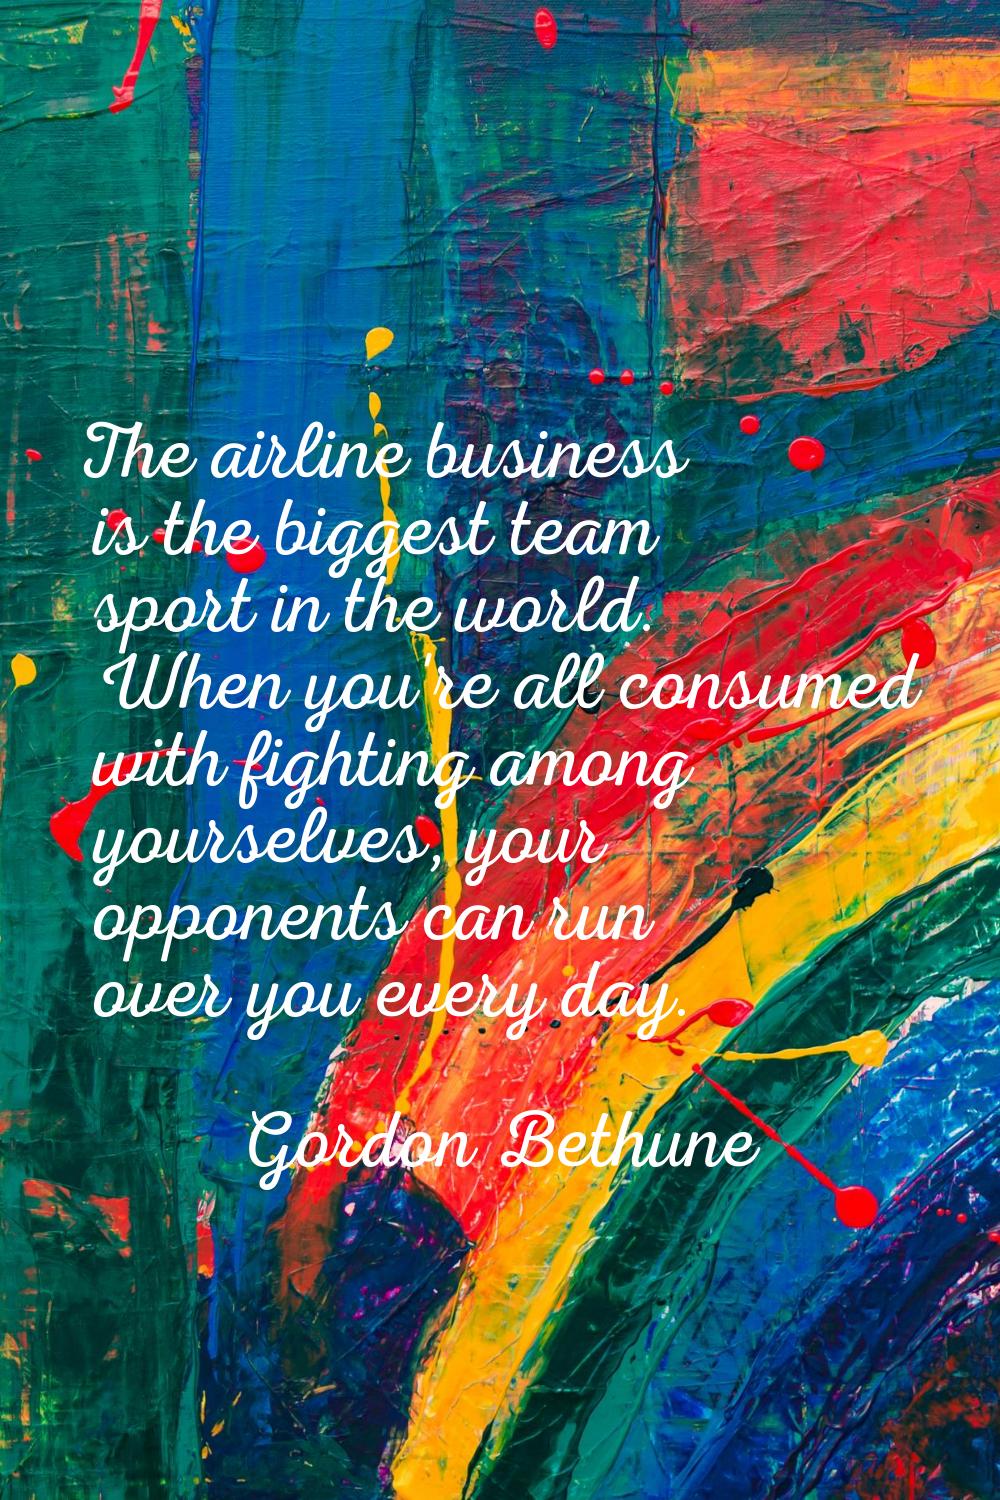 The airline business is the biggest team sport in the world. When you're all consumed with fighting